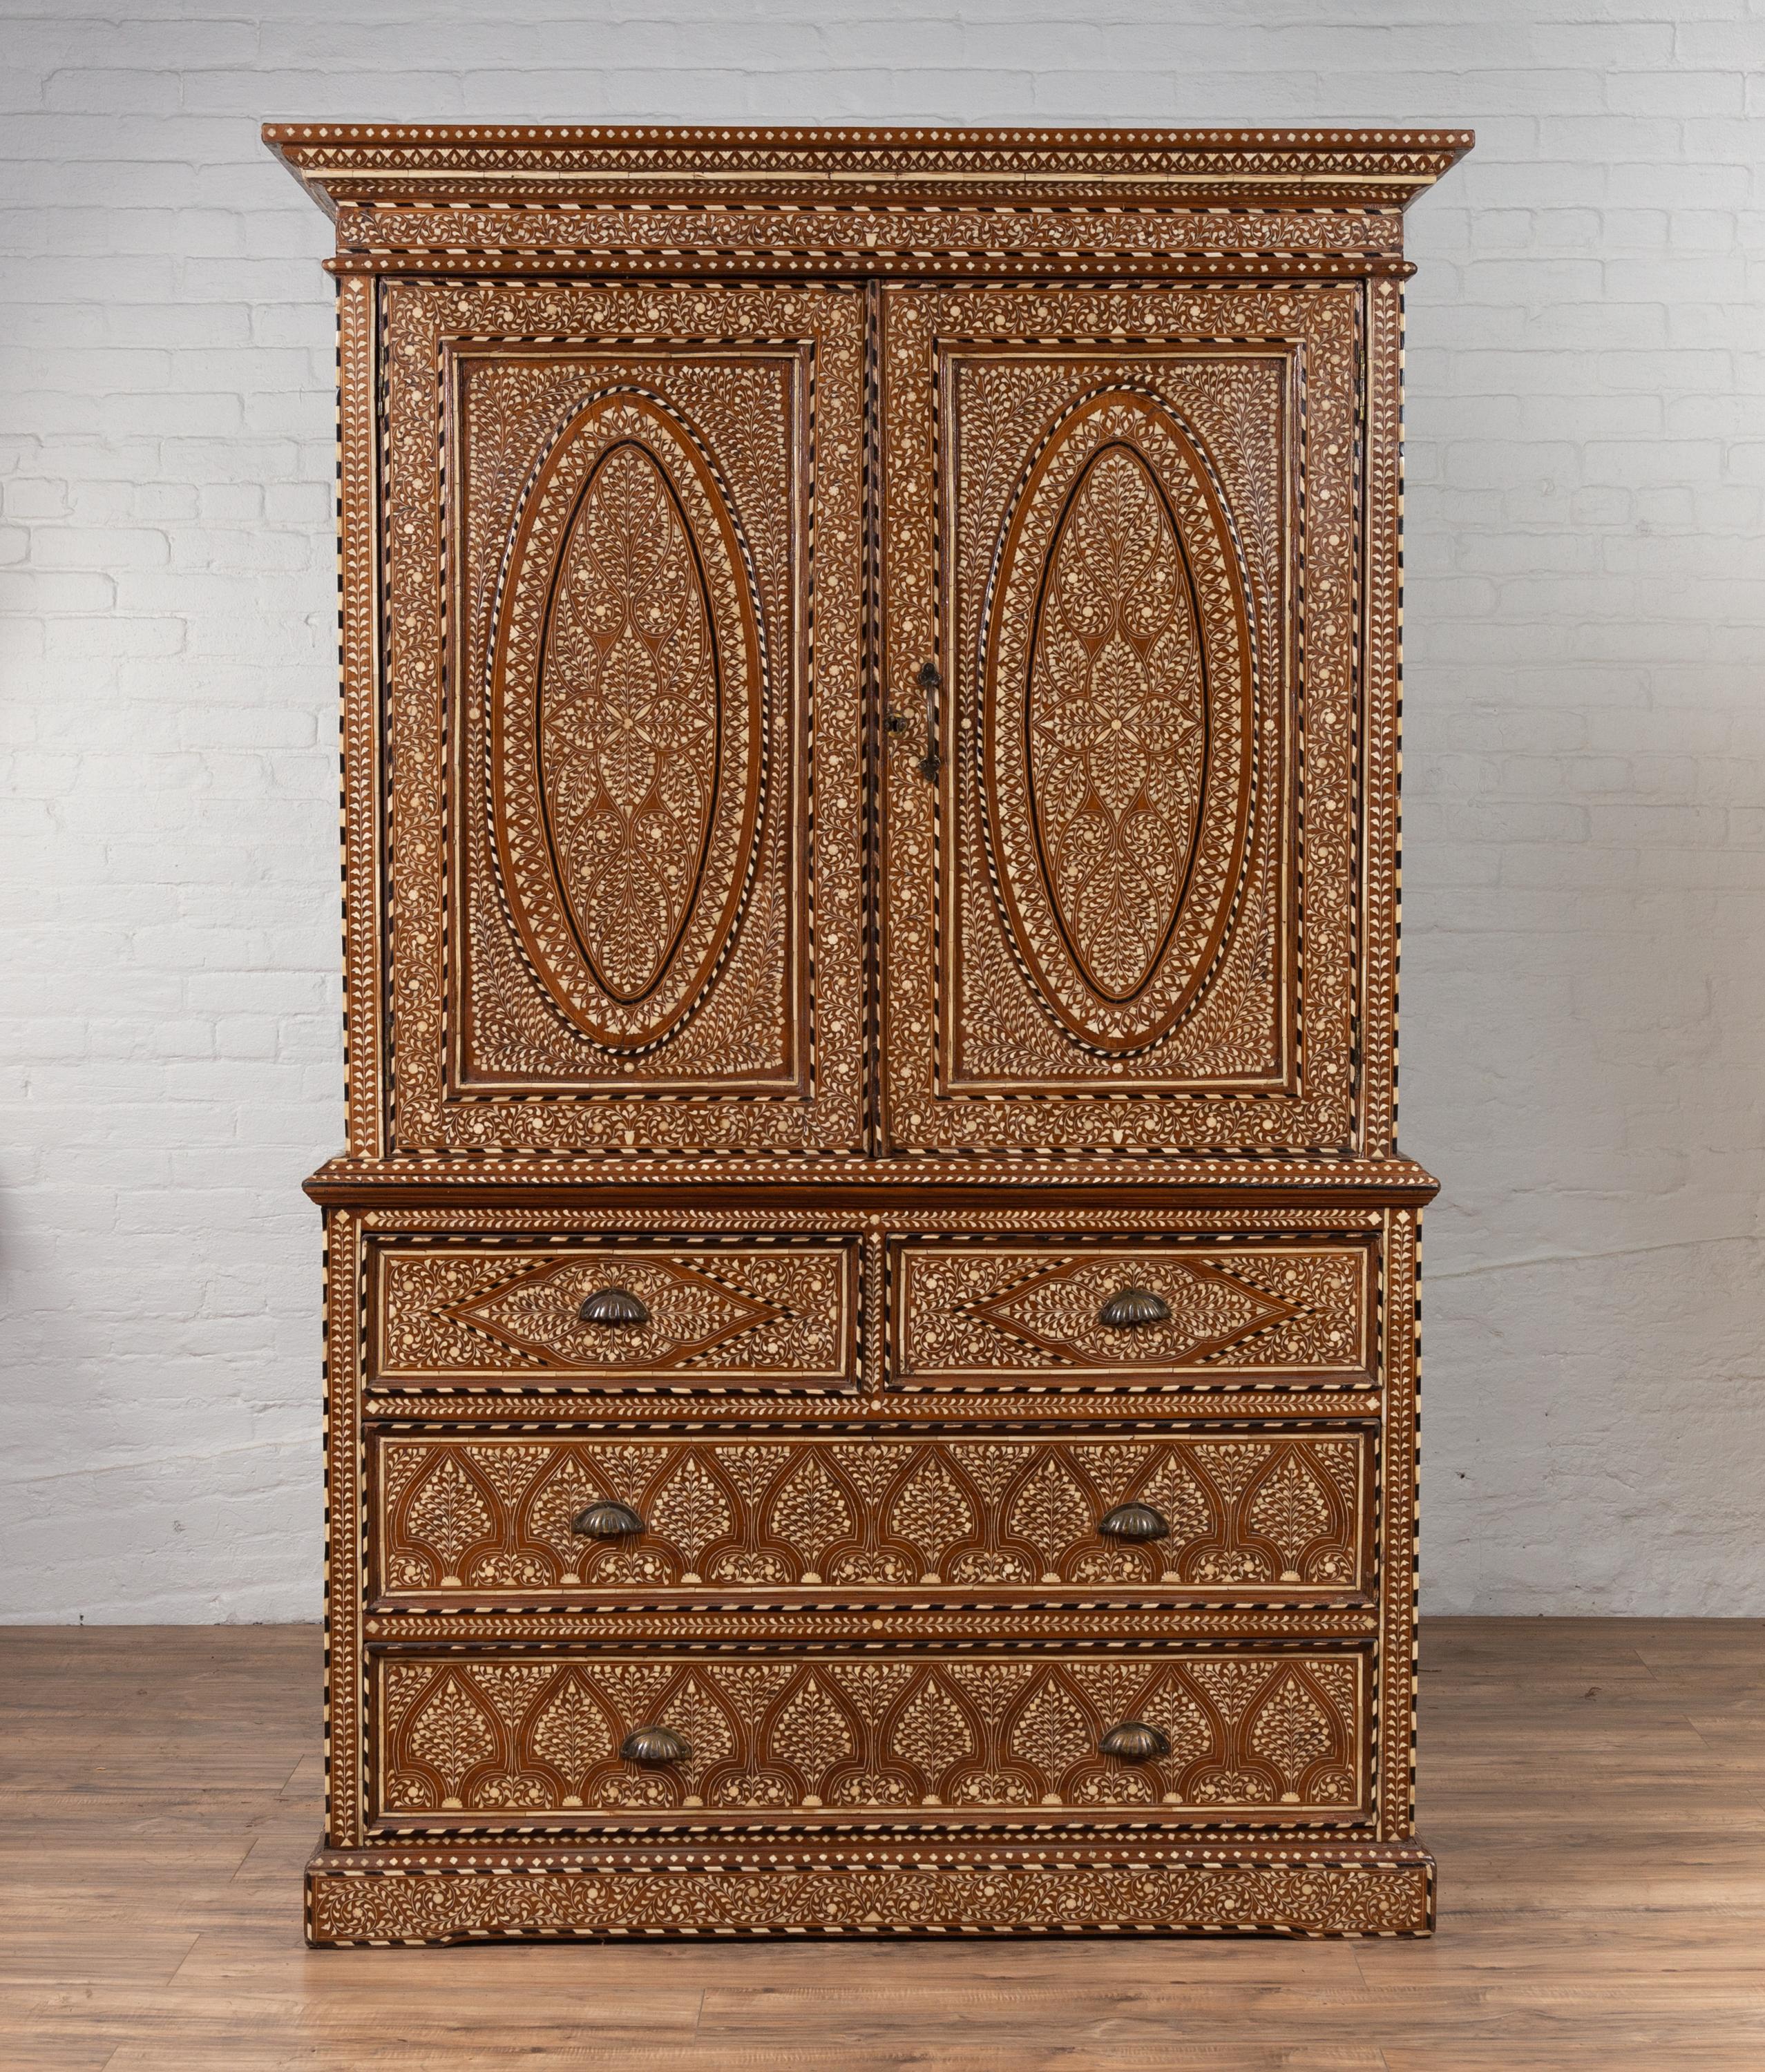 An antique Indian sheesham wood wardrobe cabinet from the early 20th century, with ebonized accents and bone inlay. Born in India during the early years of the 20th century, this stunning tall cabinet is adorned with an abundant décor of foliage and